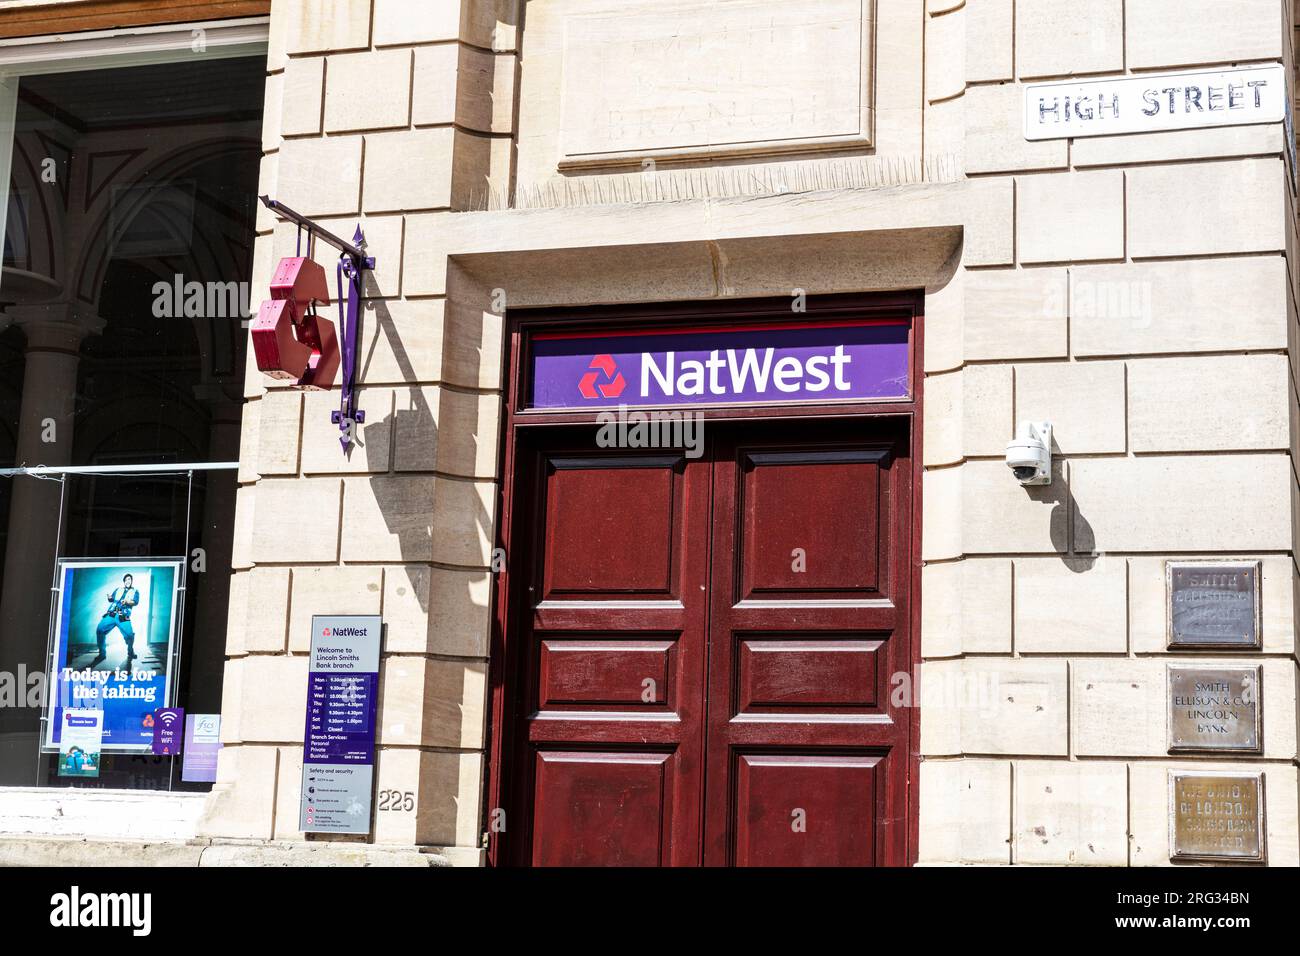 NatWest sign, Lincoln City, Lincolnshire, UK, England, Natwest, Natwest bank, NatWest UK, UK Banks, UK bank, high street bank, high street banks Stock Photo